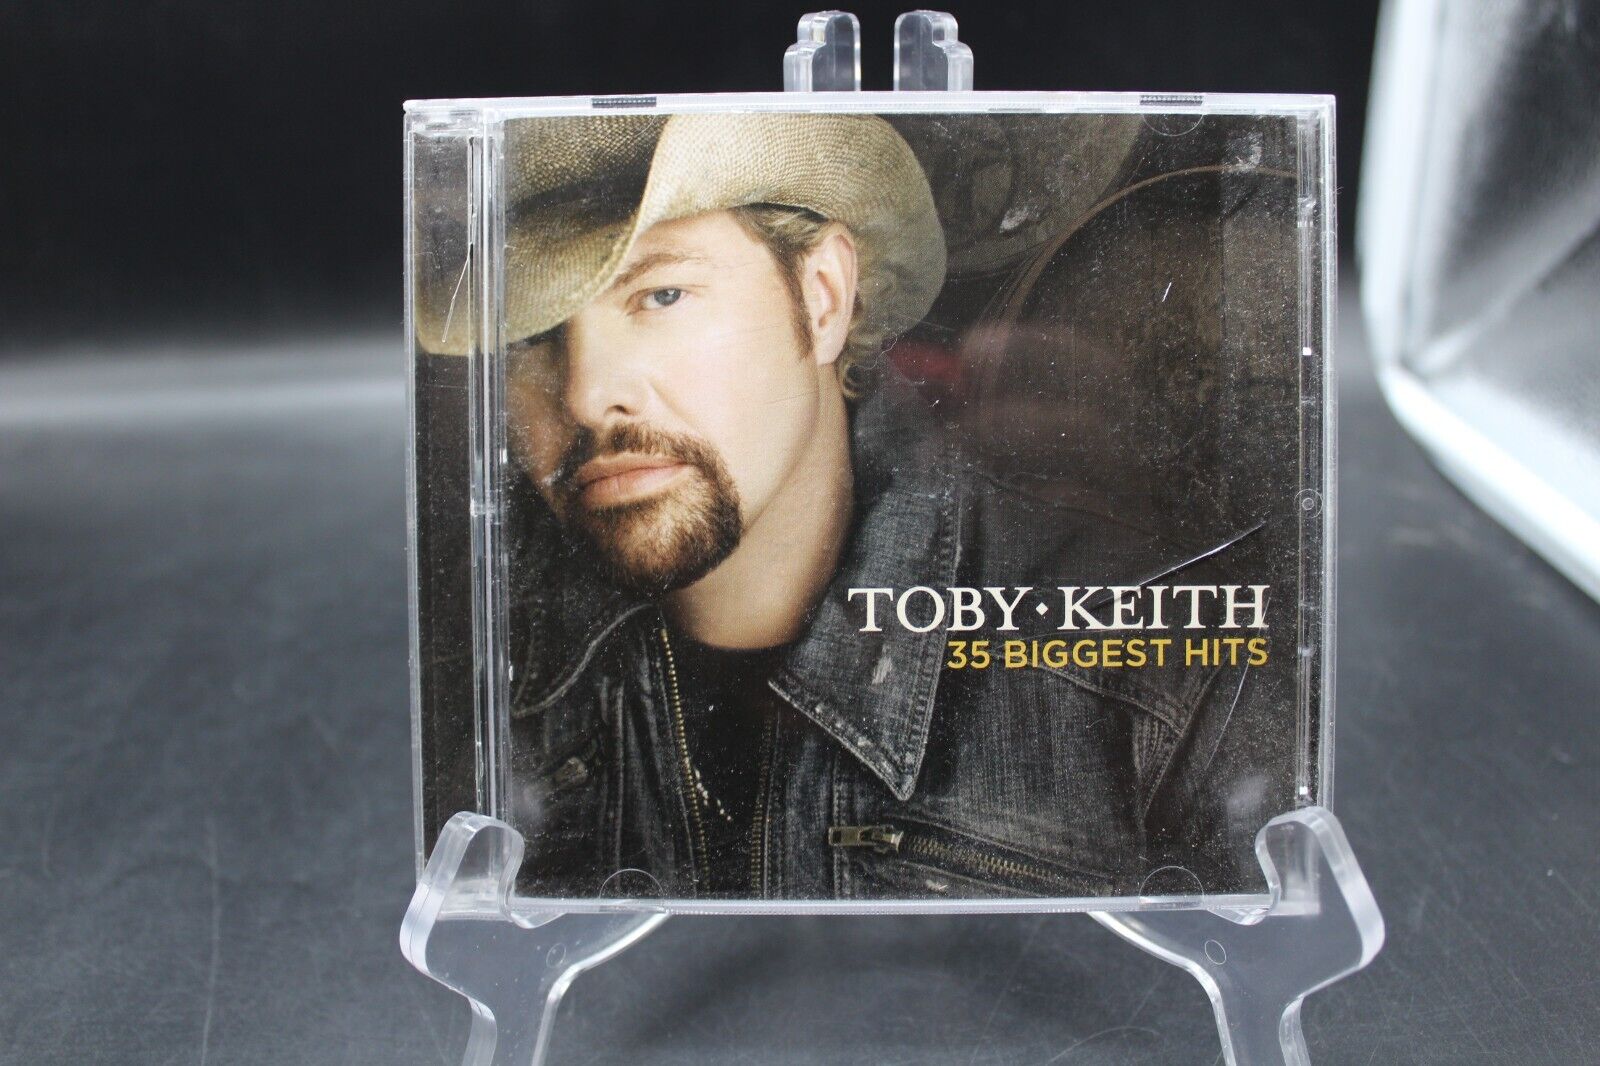 Toby Keith - 35 Biggest Hits (CD) 2 Disk Set 